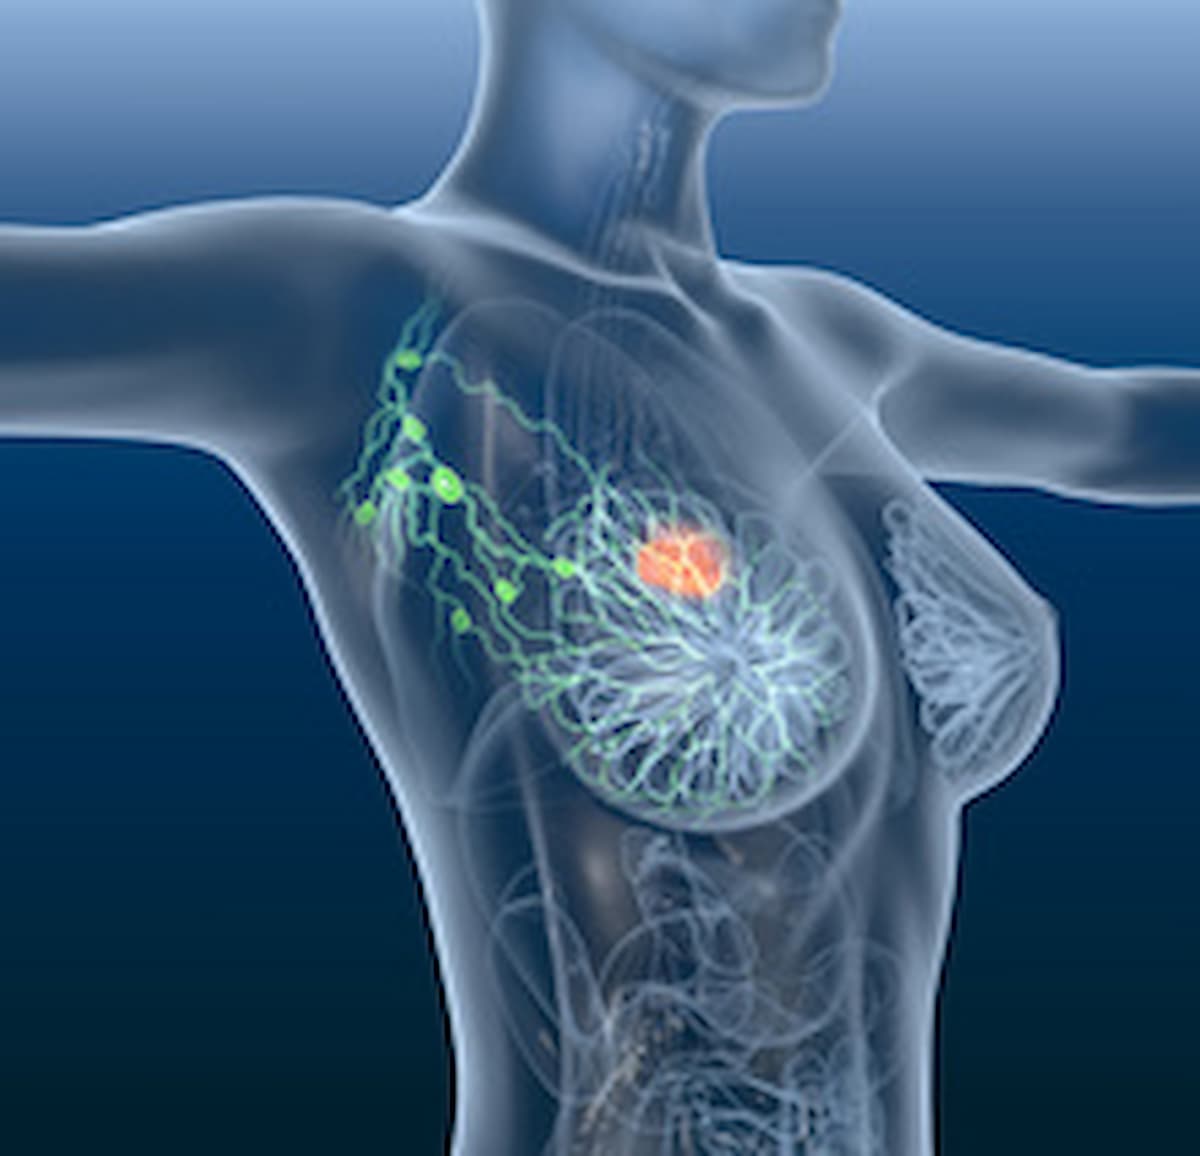 ER Antagonist OP-1250 Demonstrates Continued Anti-Tumor Activity in Advanced ER+ HER2– Breast Cancer - Cancer Network